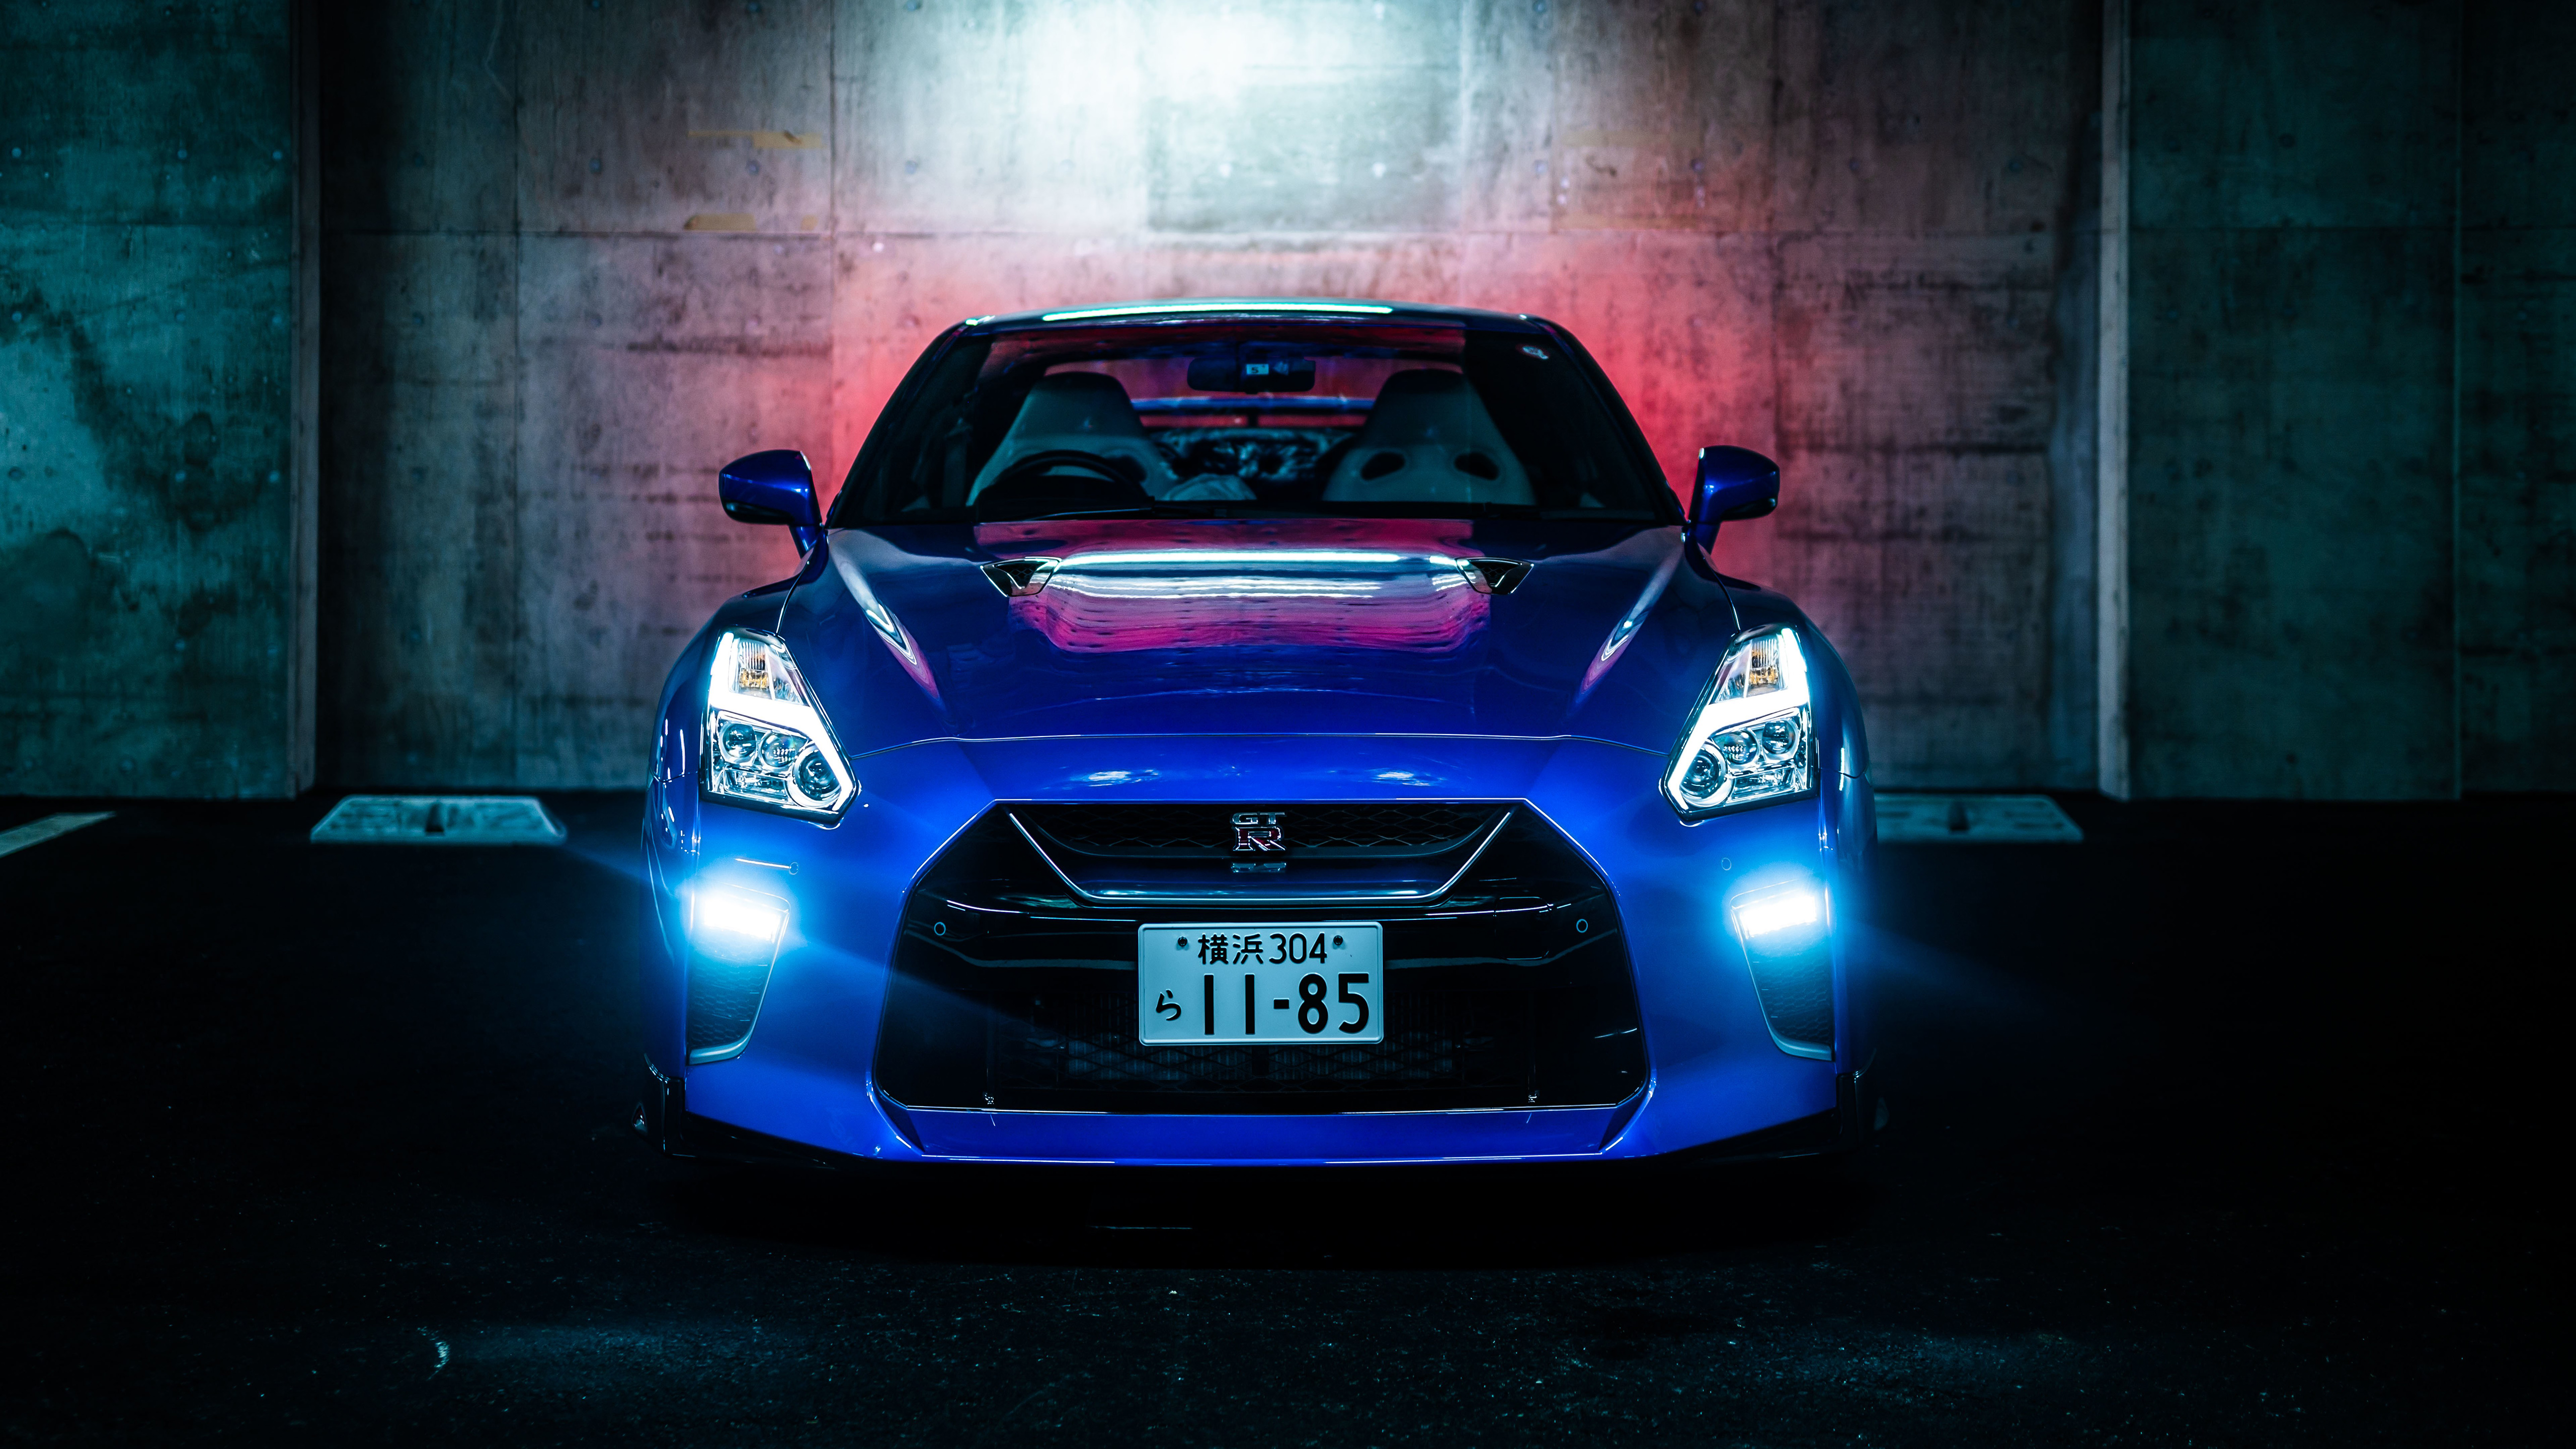 General 5120x2880 Nissan GT-R car vehicle blue cars parking lot low light supercars Nissan frontal view Japanese cars